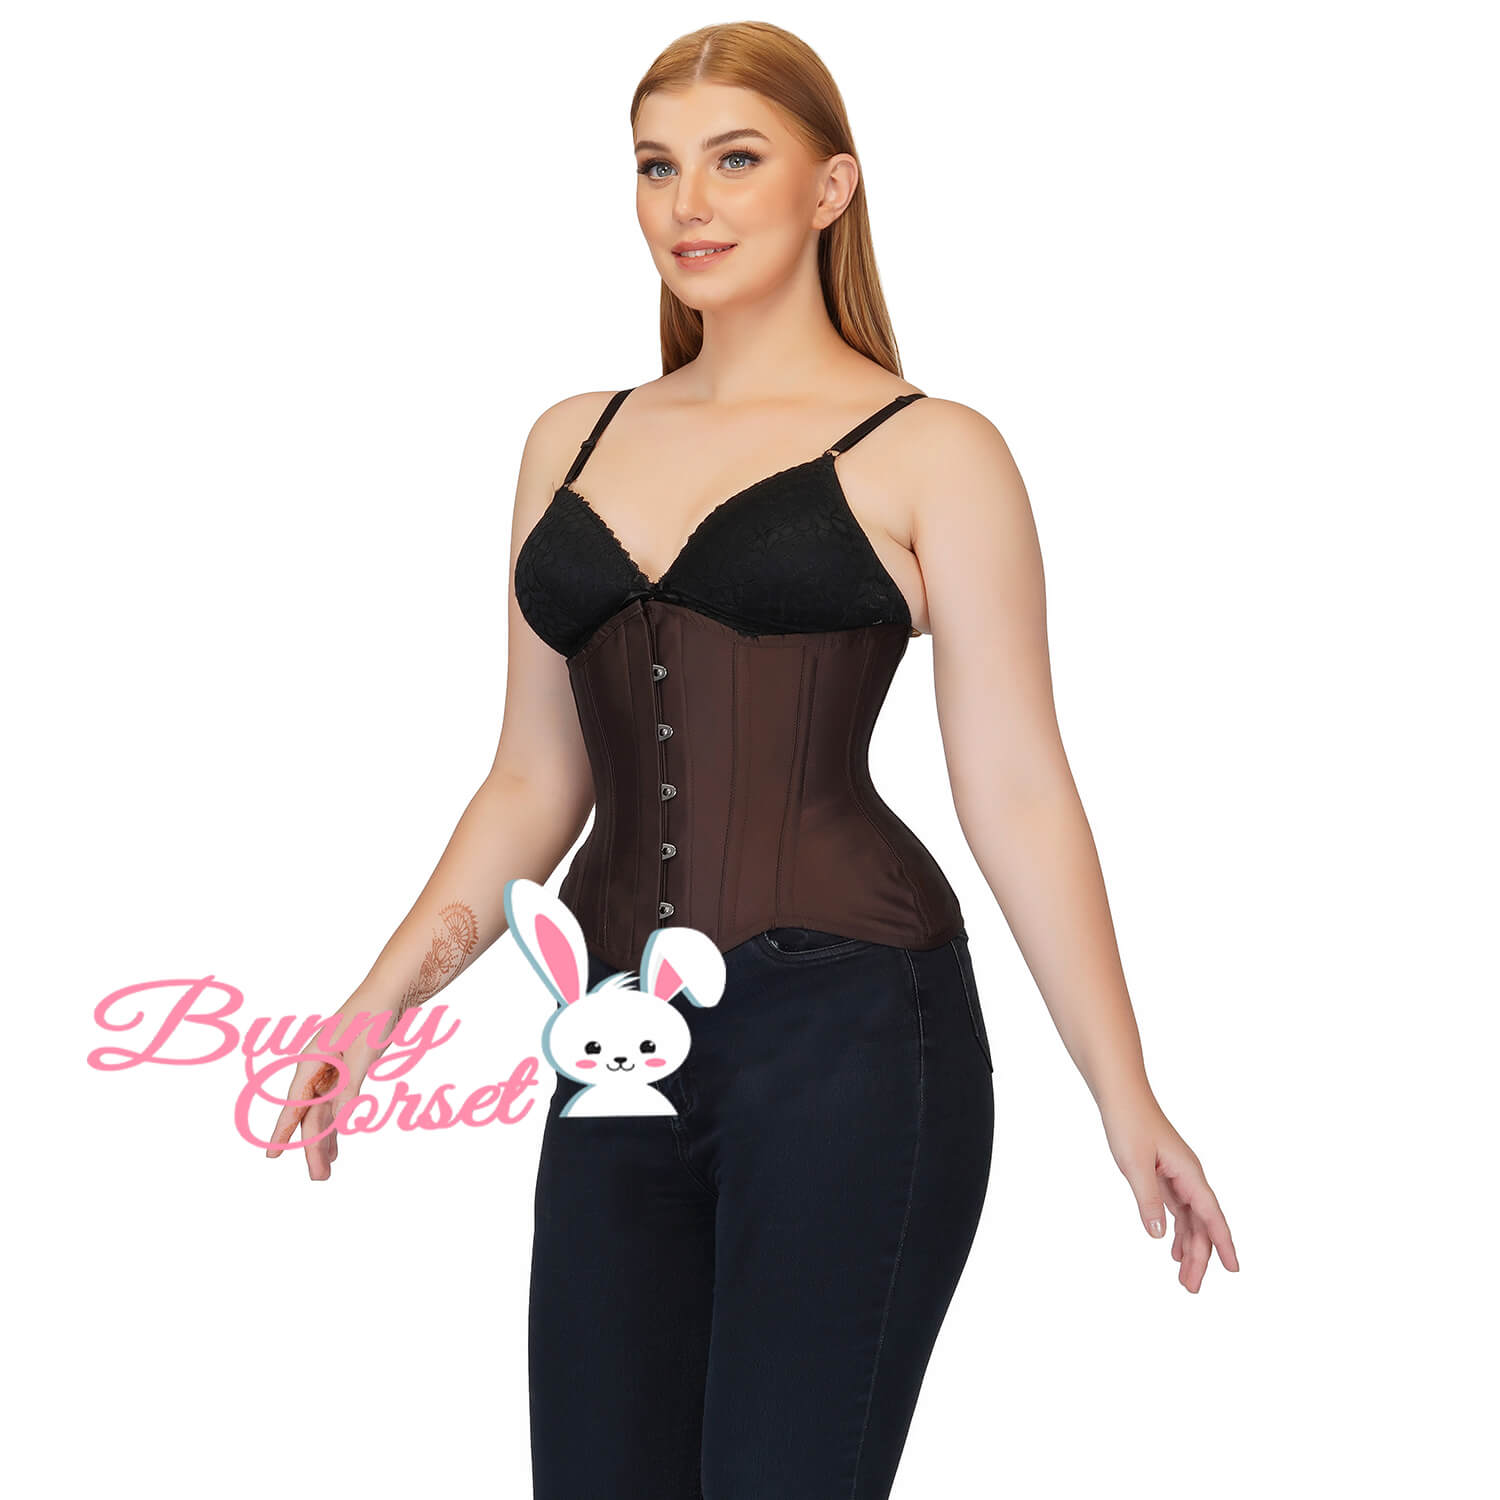 Get Brown Curvy Corset for style – Bunny Corset